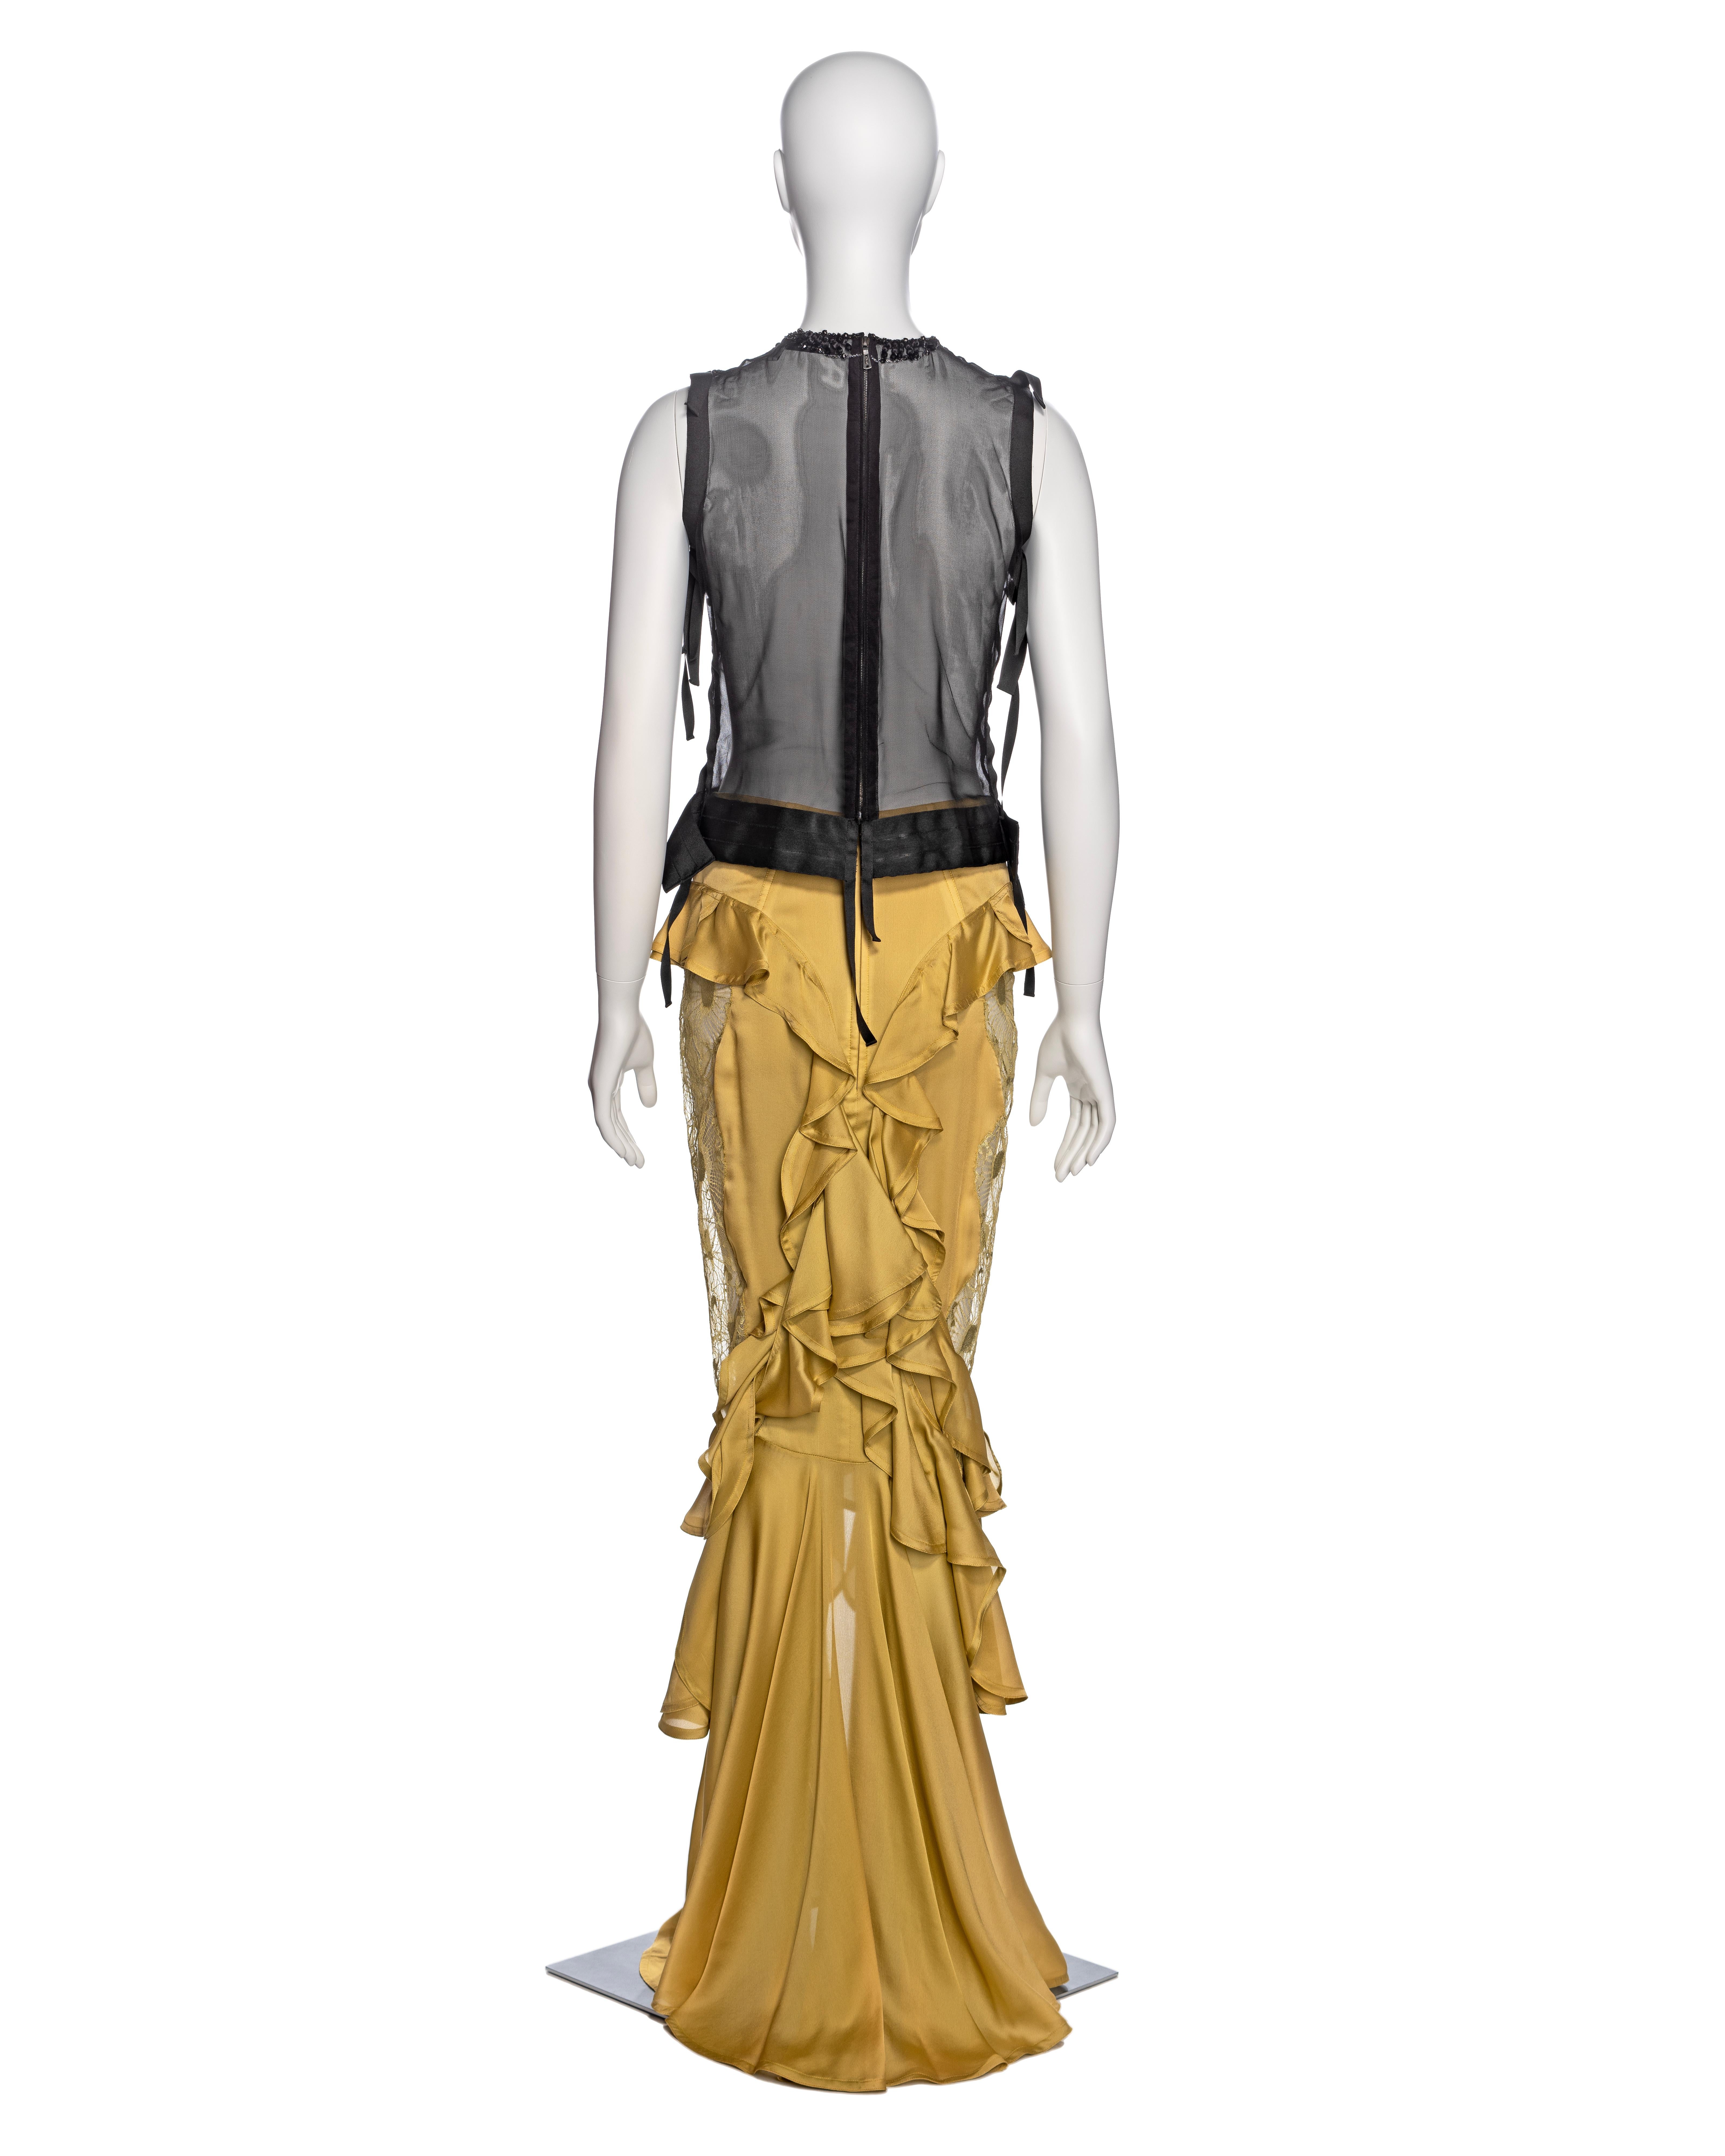 Yves Saint Laurent by Tom Ford Embellished Top and Silk Skirt Ensemble, FW 2003 For Sale 8